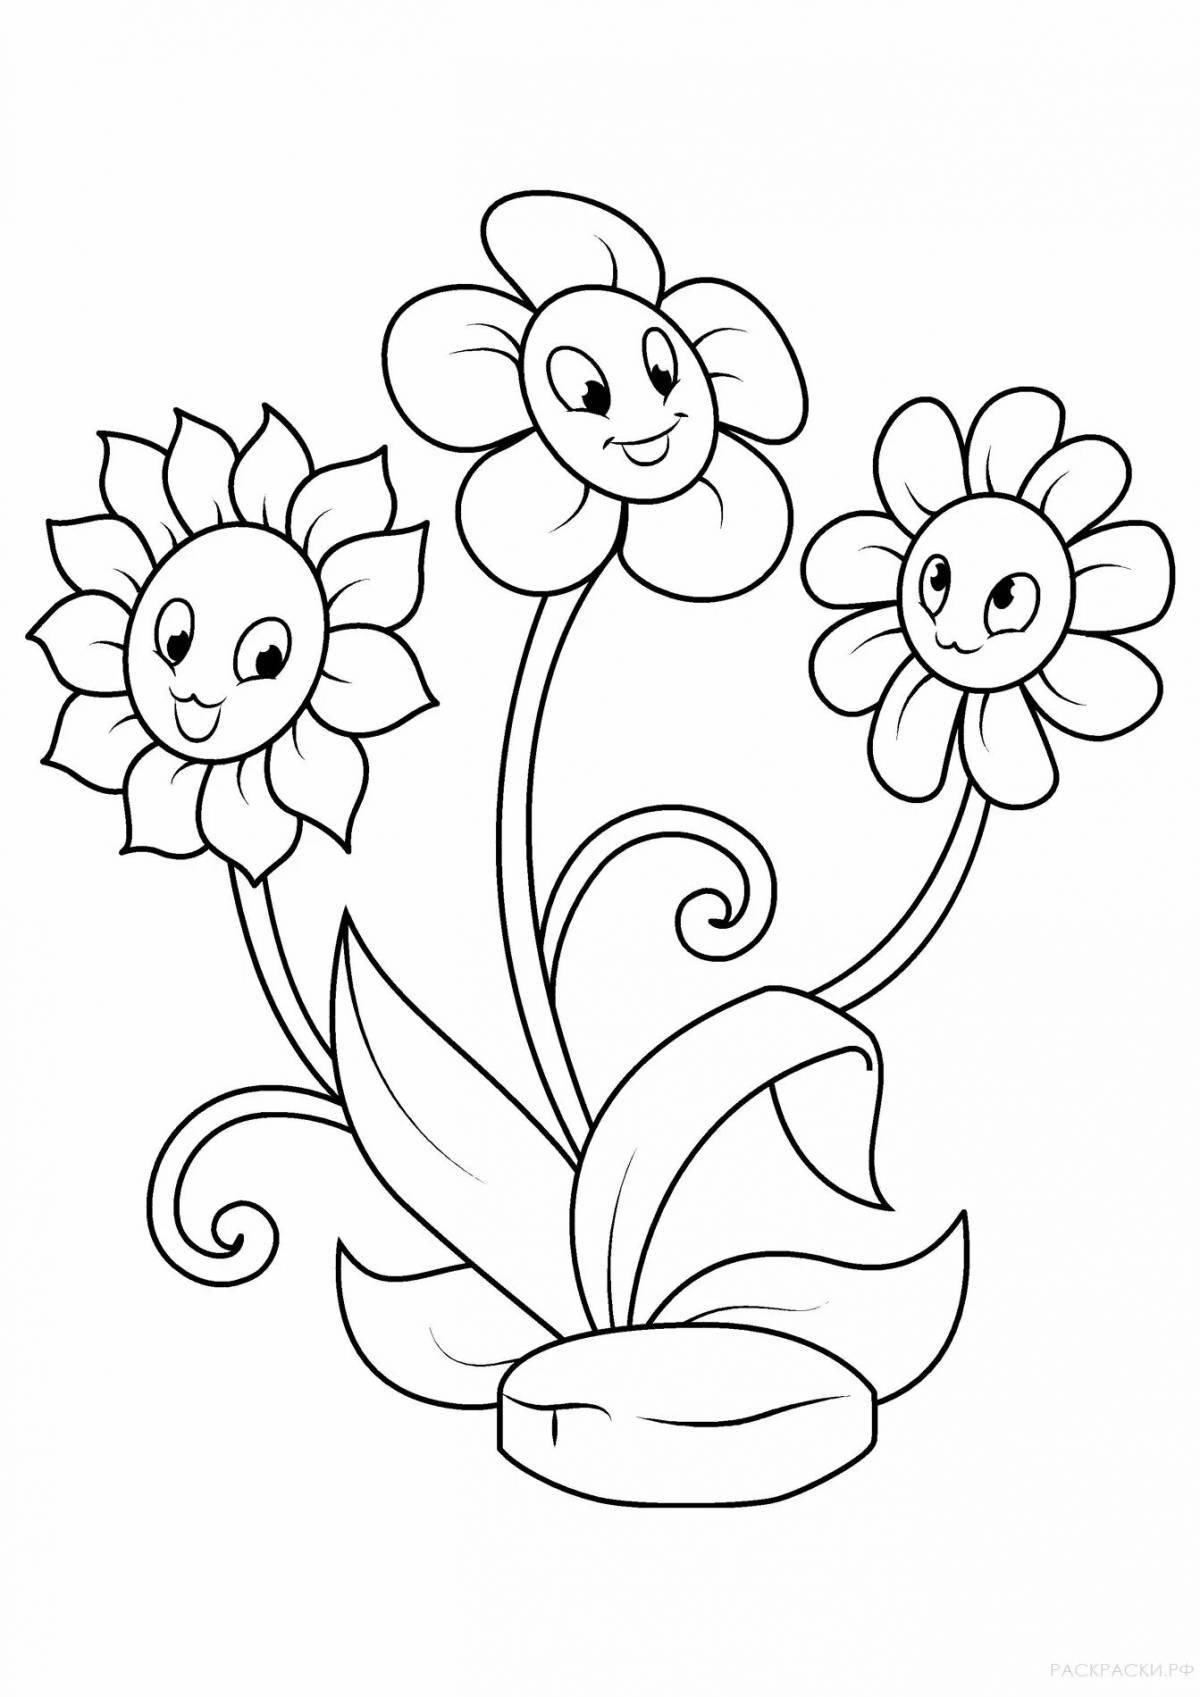 Colorful playful flowers coloring book for 7 year olds